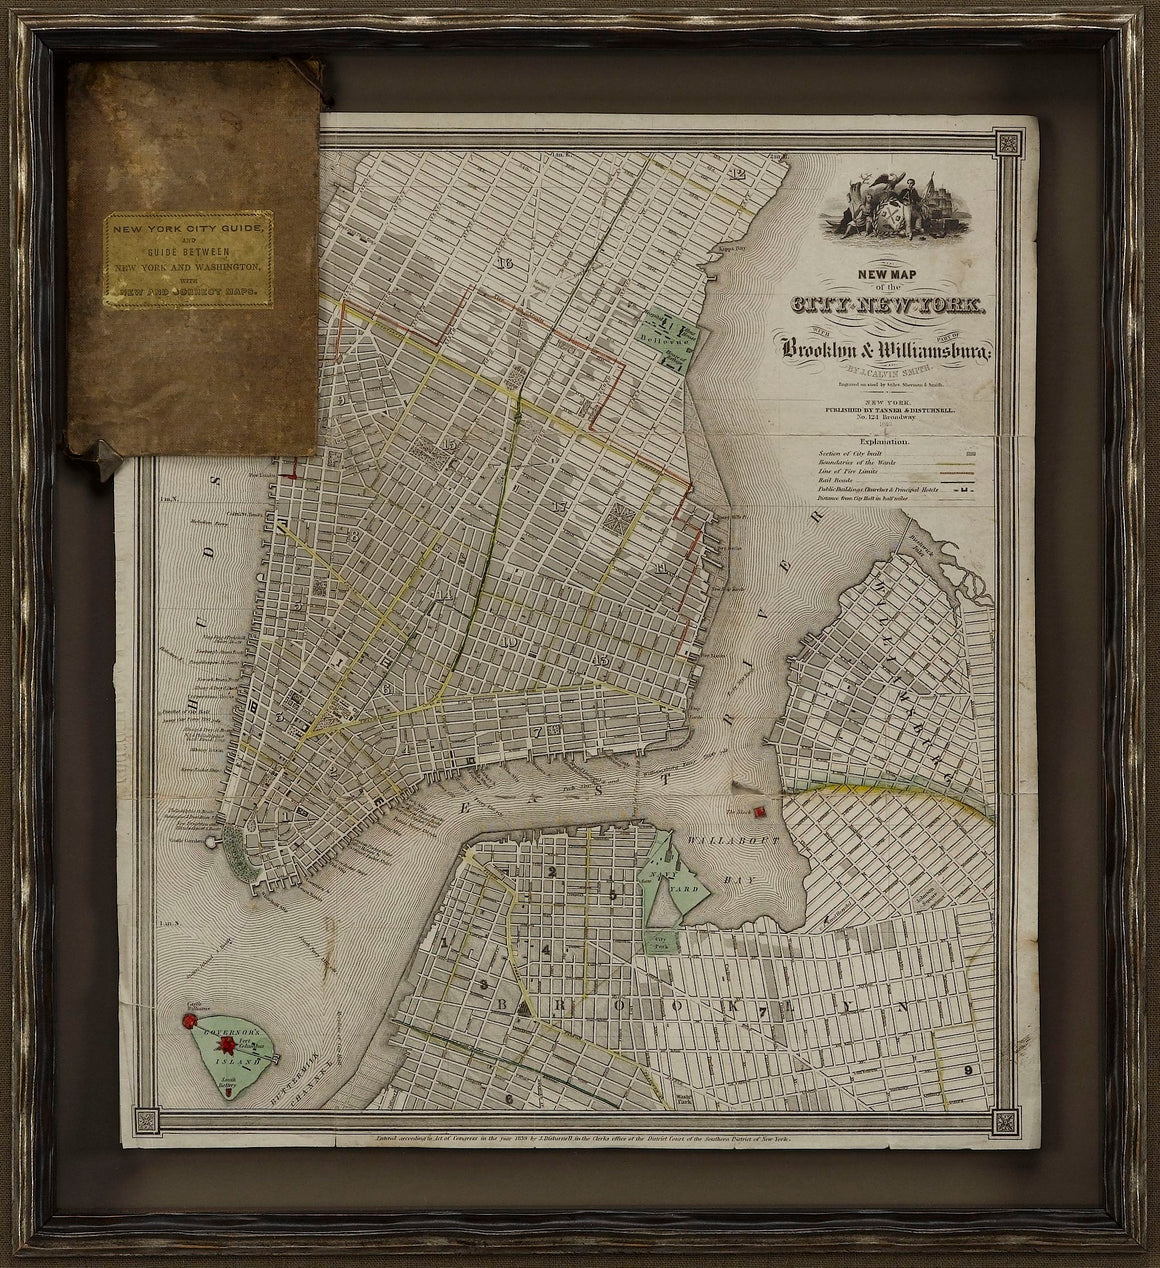 1840 "New Map of the City of New York With Part of Brooklyn & Williamsburg" by J. Calvin Smith